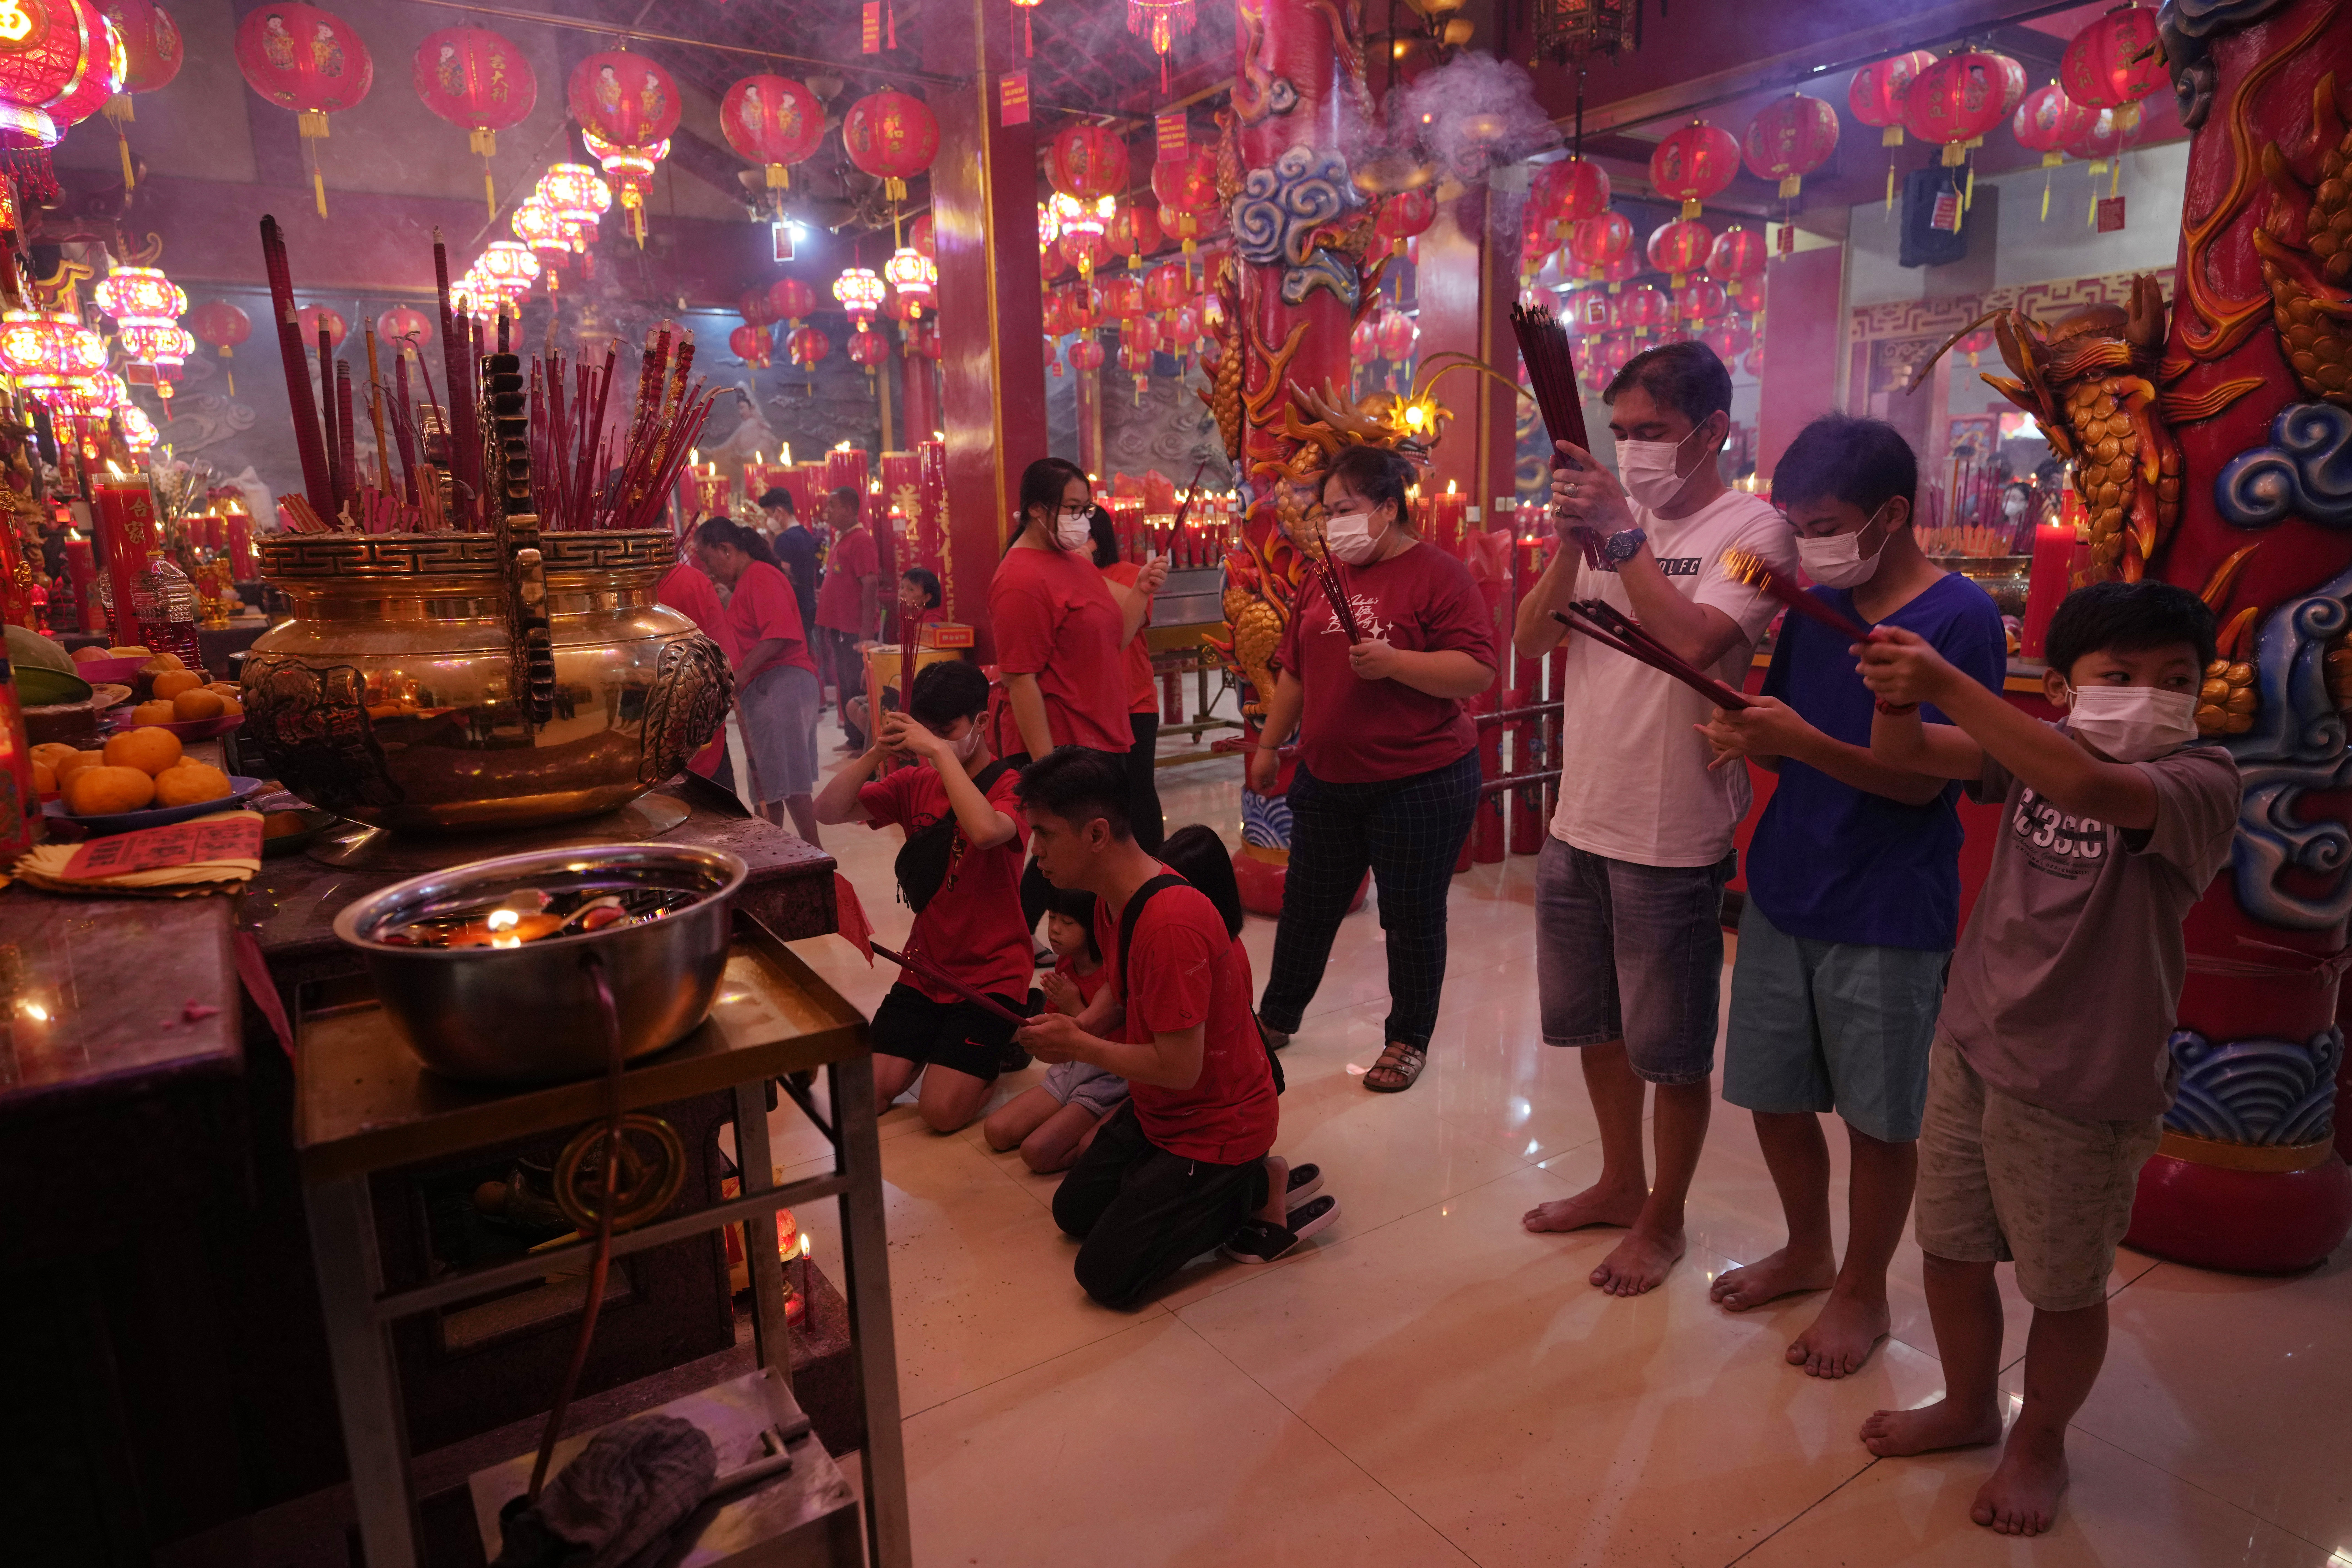 Worshipers wearing face masks offer prayers at the Hok Lay Kiong Temple in Bekasi, Indonesia, Sunday, Jan. 22, 2023. The Lunar New Year kicked off the Year of the Rabbit according to the Chinese zodiac.  (AP Photo/Achmad Ibrahim)